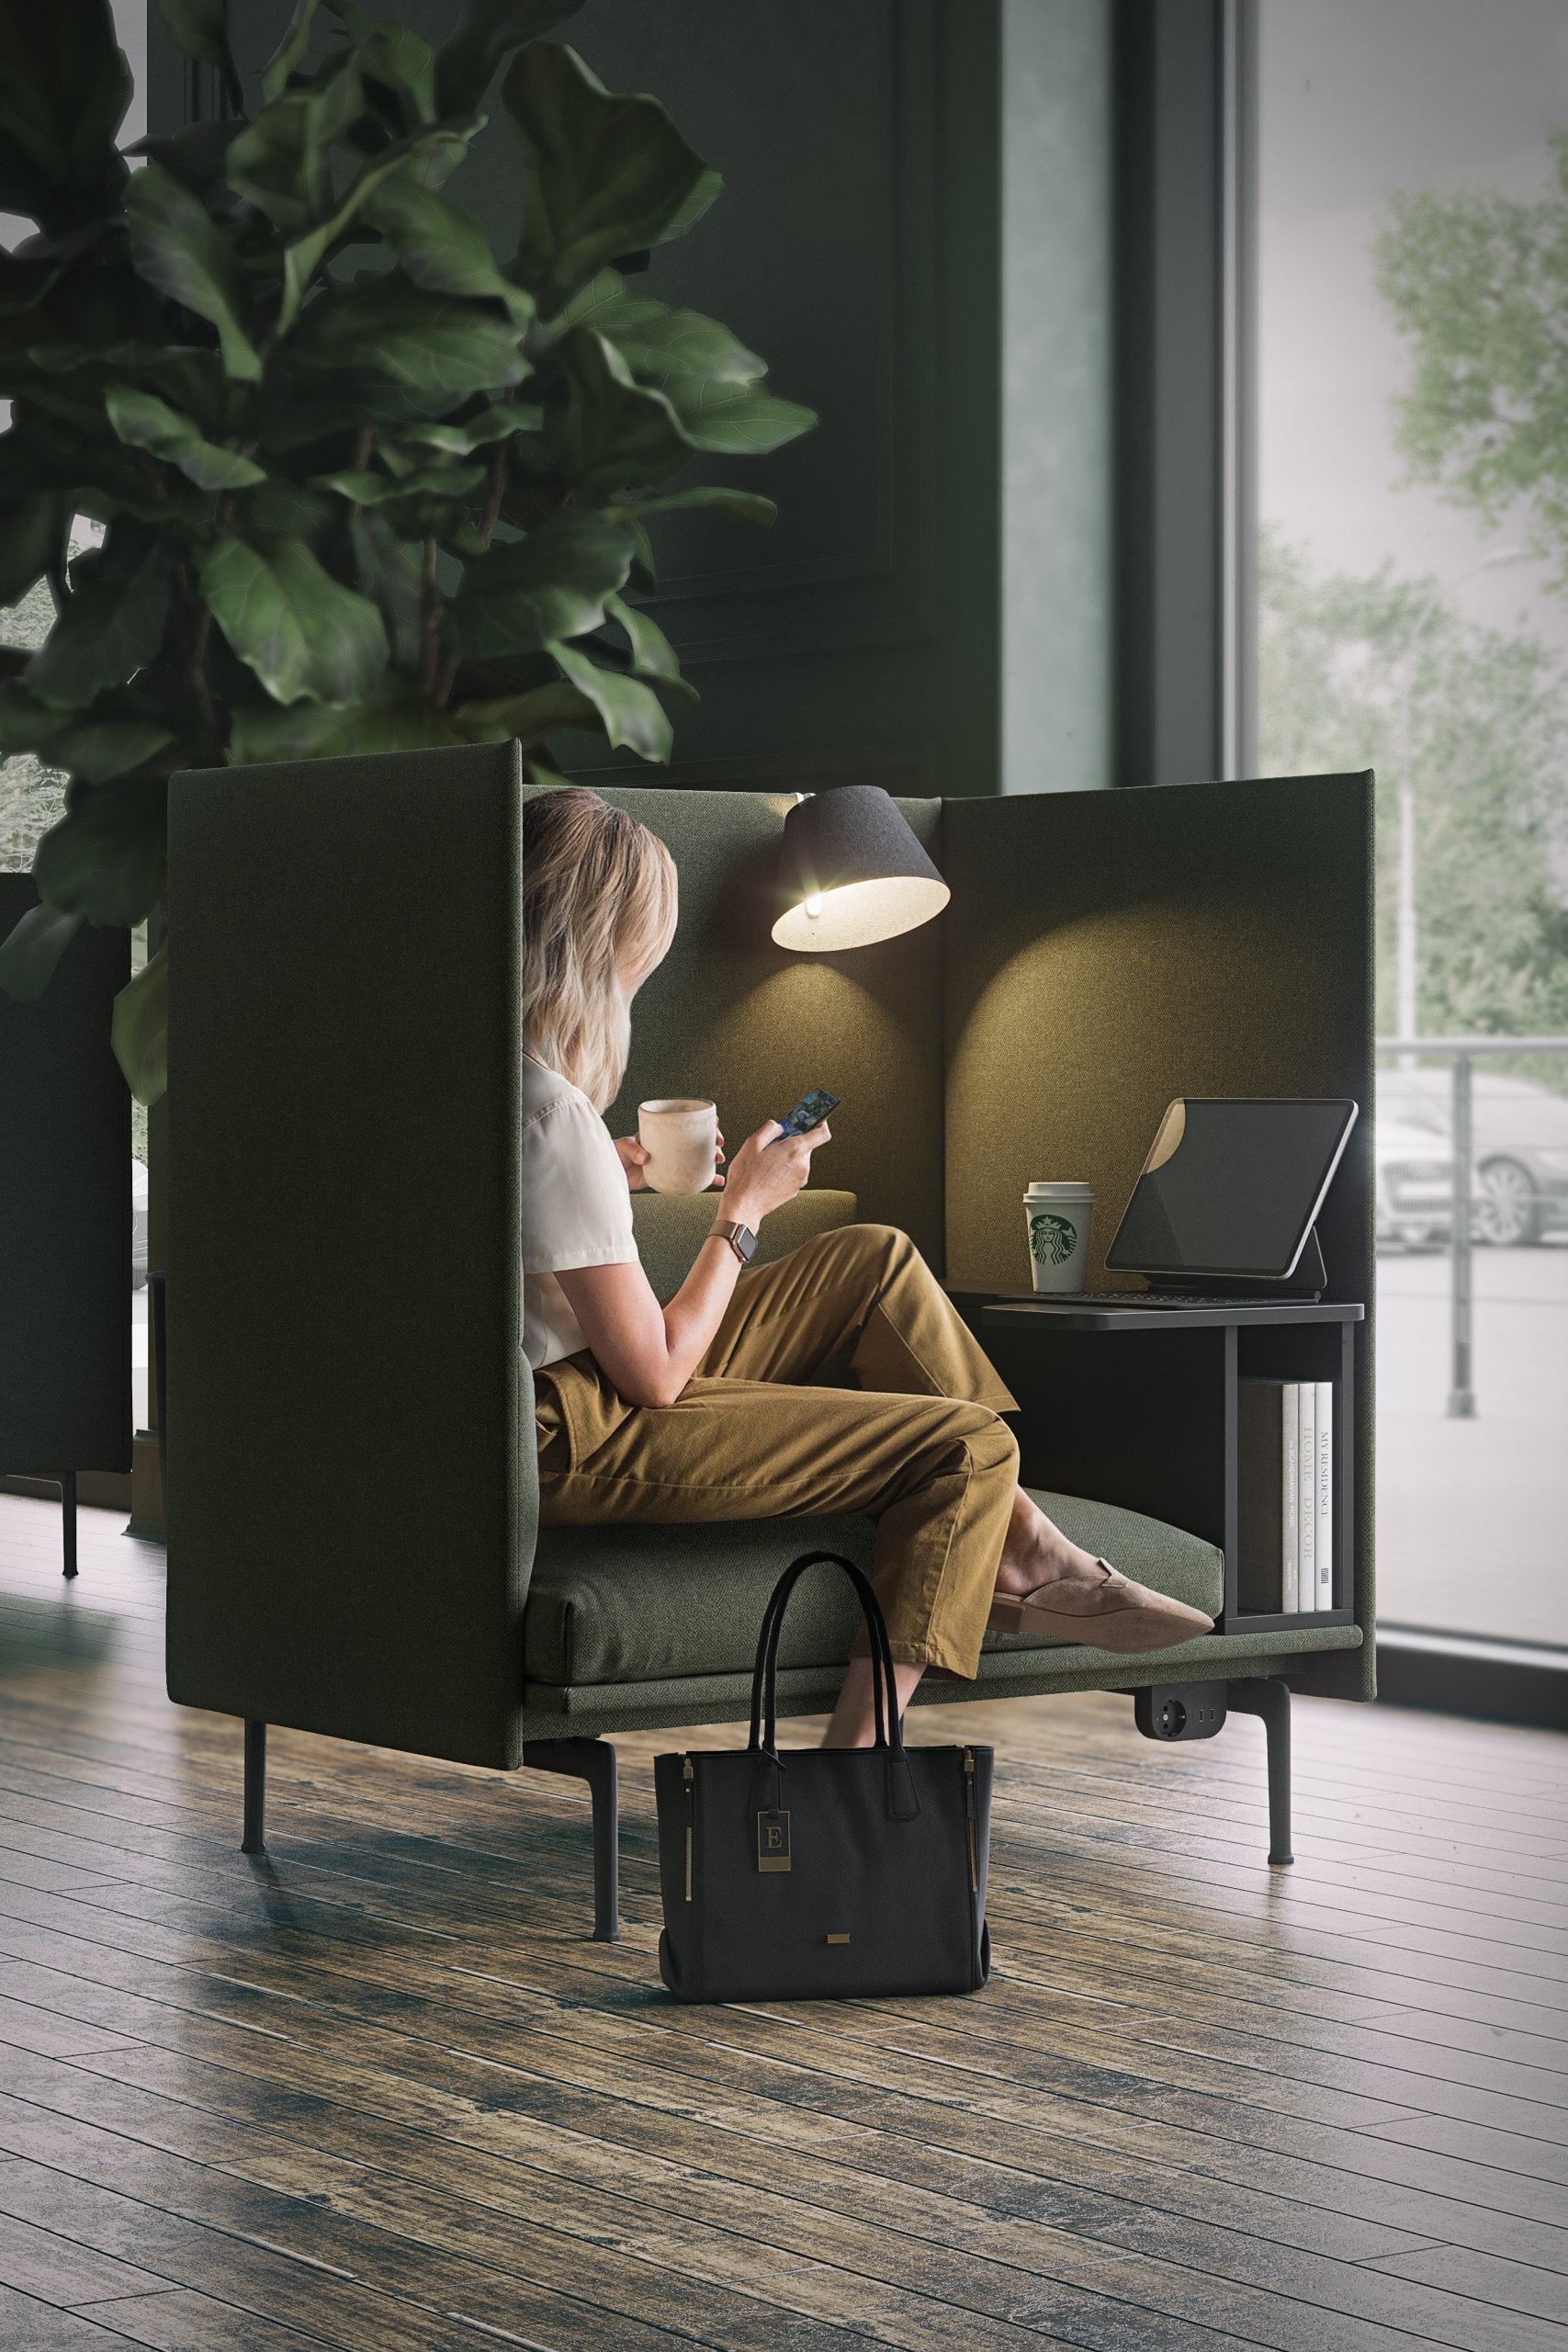 3D Visualization of an Office Nook